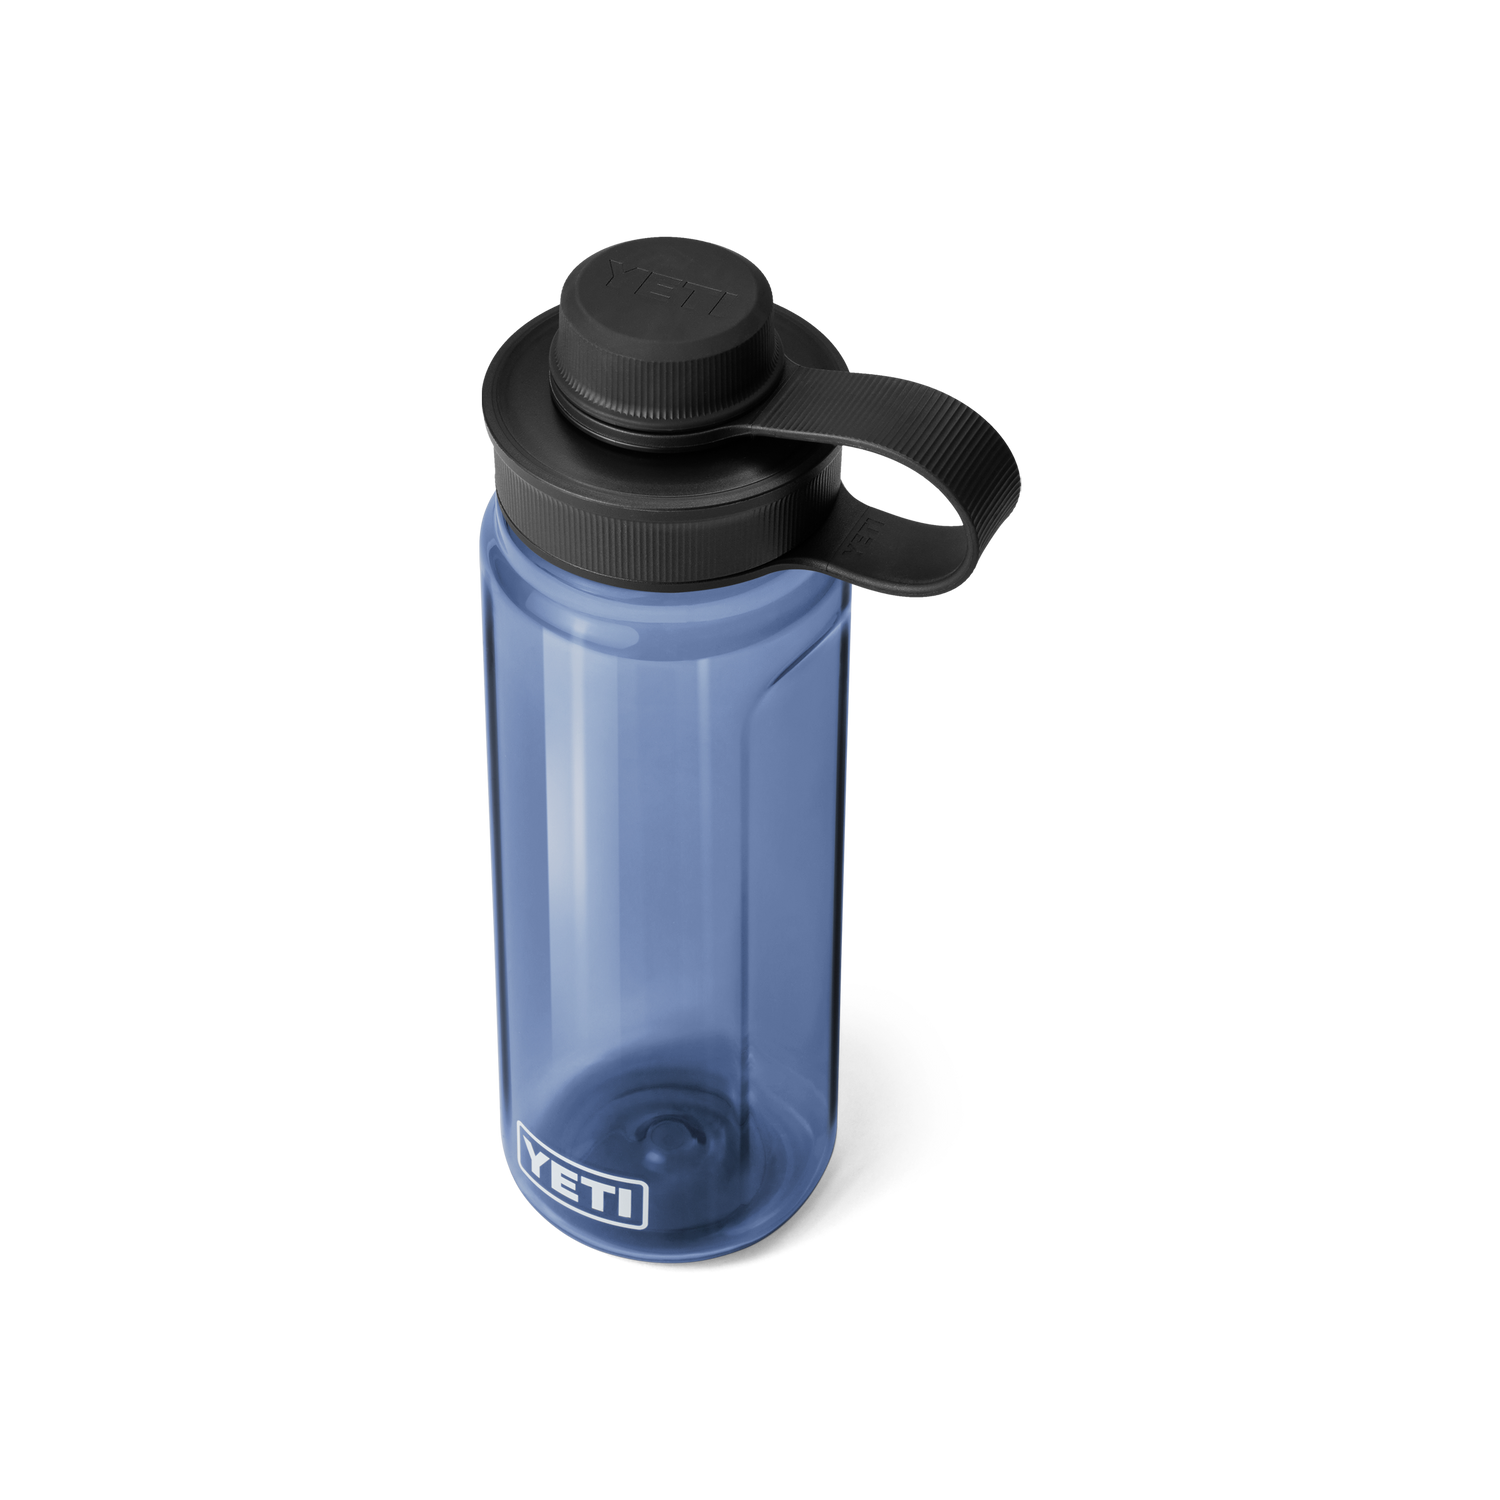 site_studio_Drinkware_Yonder_Tether_Accs_750mL_Navy_3qtr_Closed_0842_Primary_B_2400x2400.png